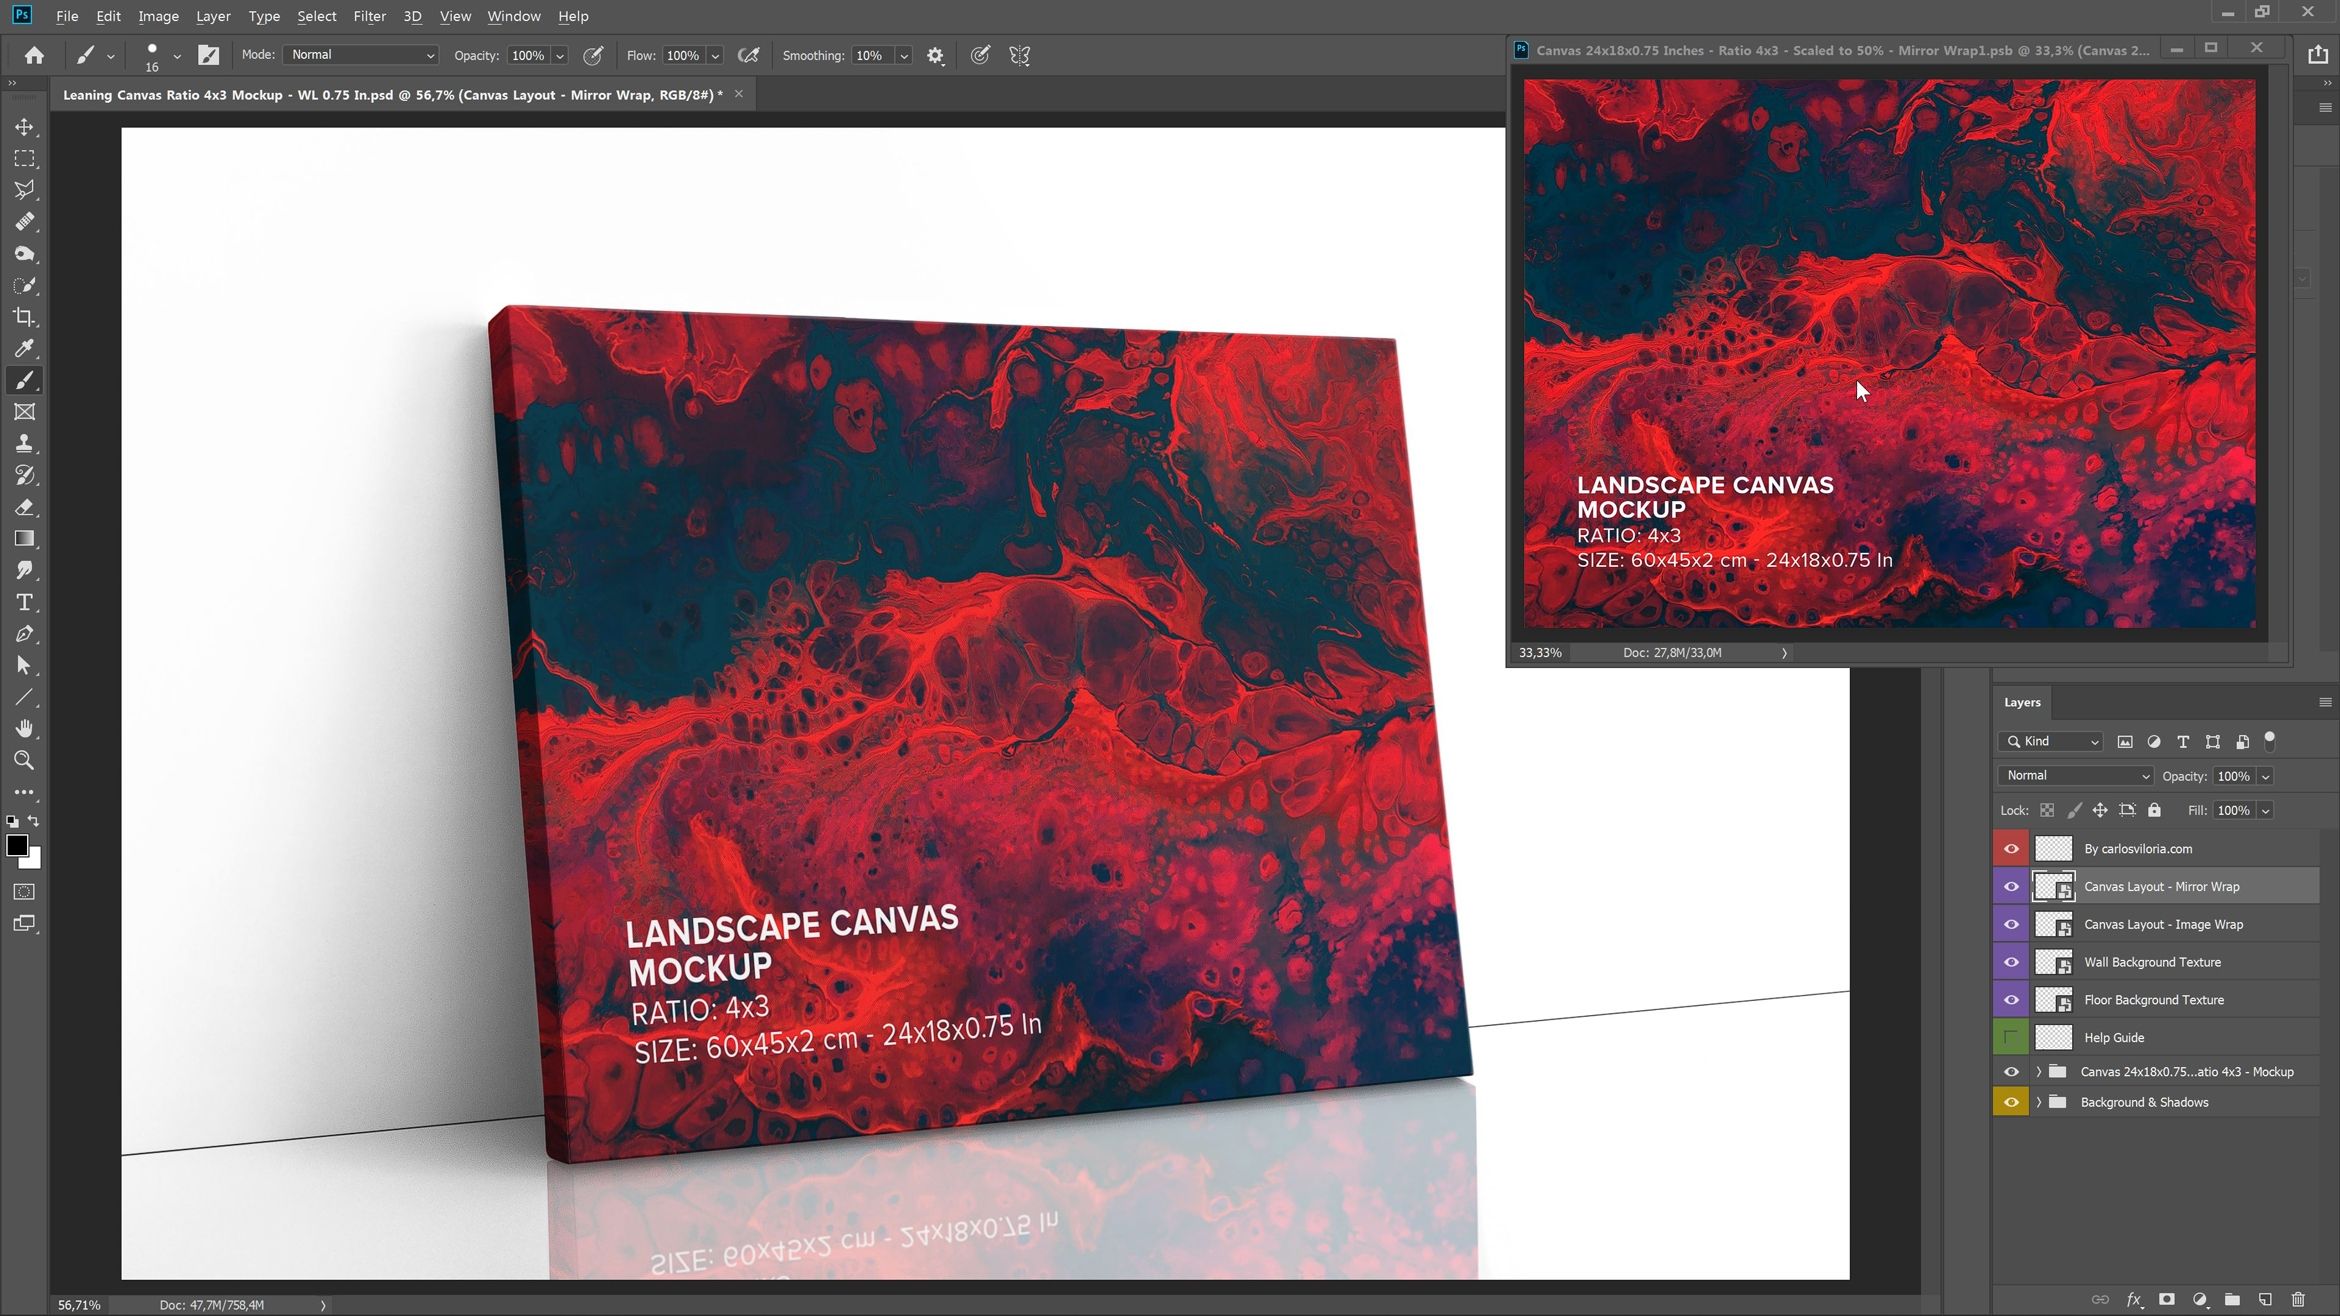 Leaning Landscape Canvas Ratio 4x3 Mockup - Left 0.75 in Wrap